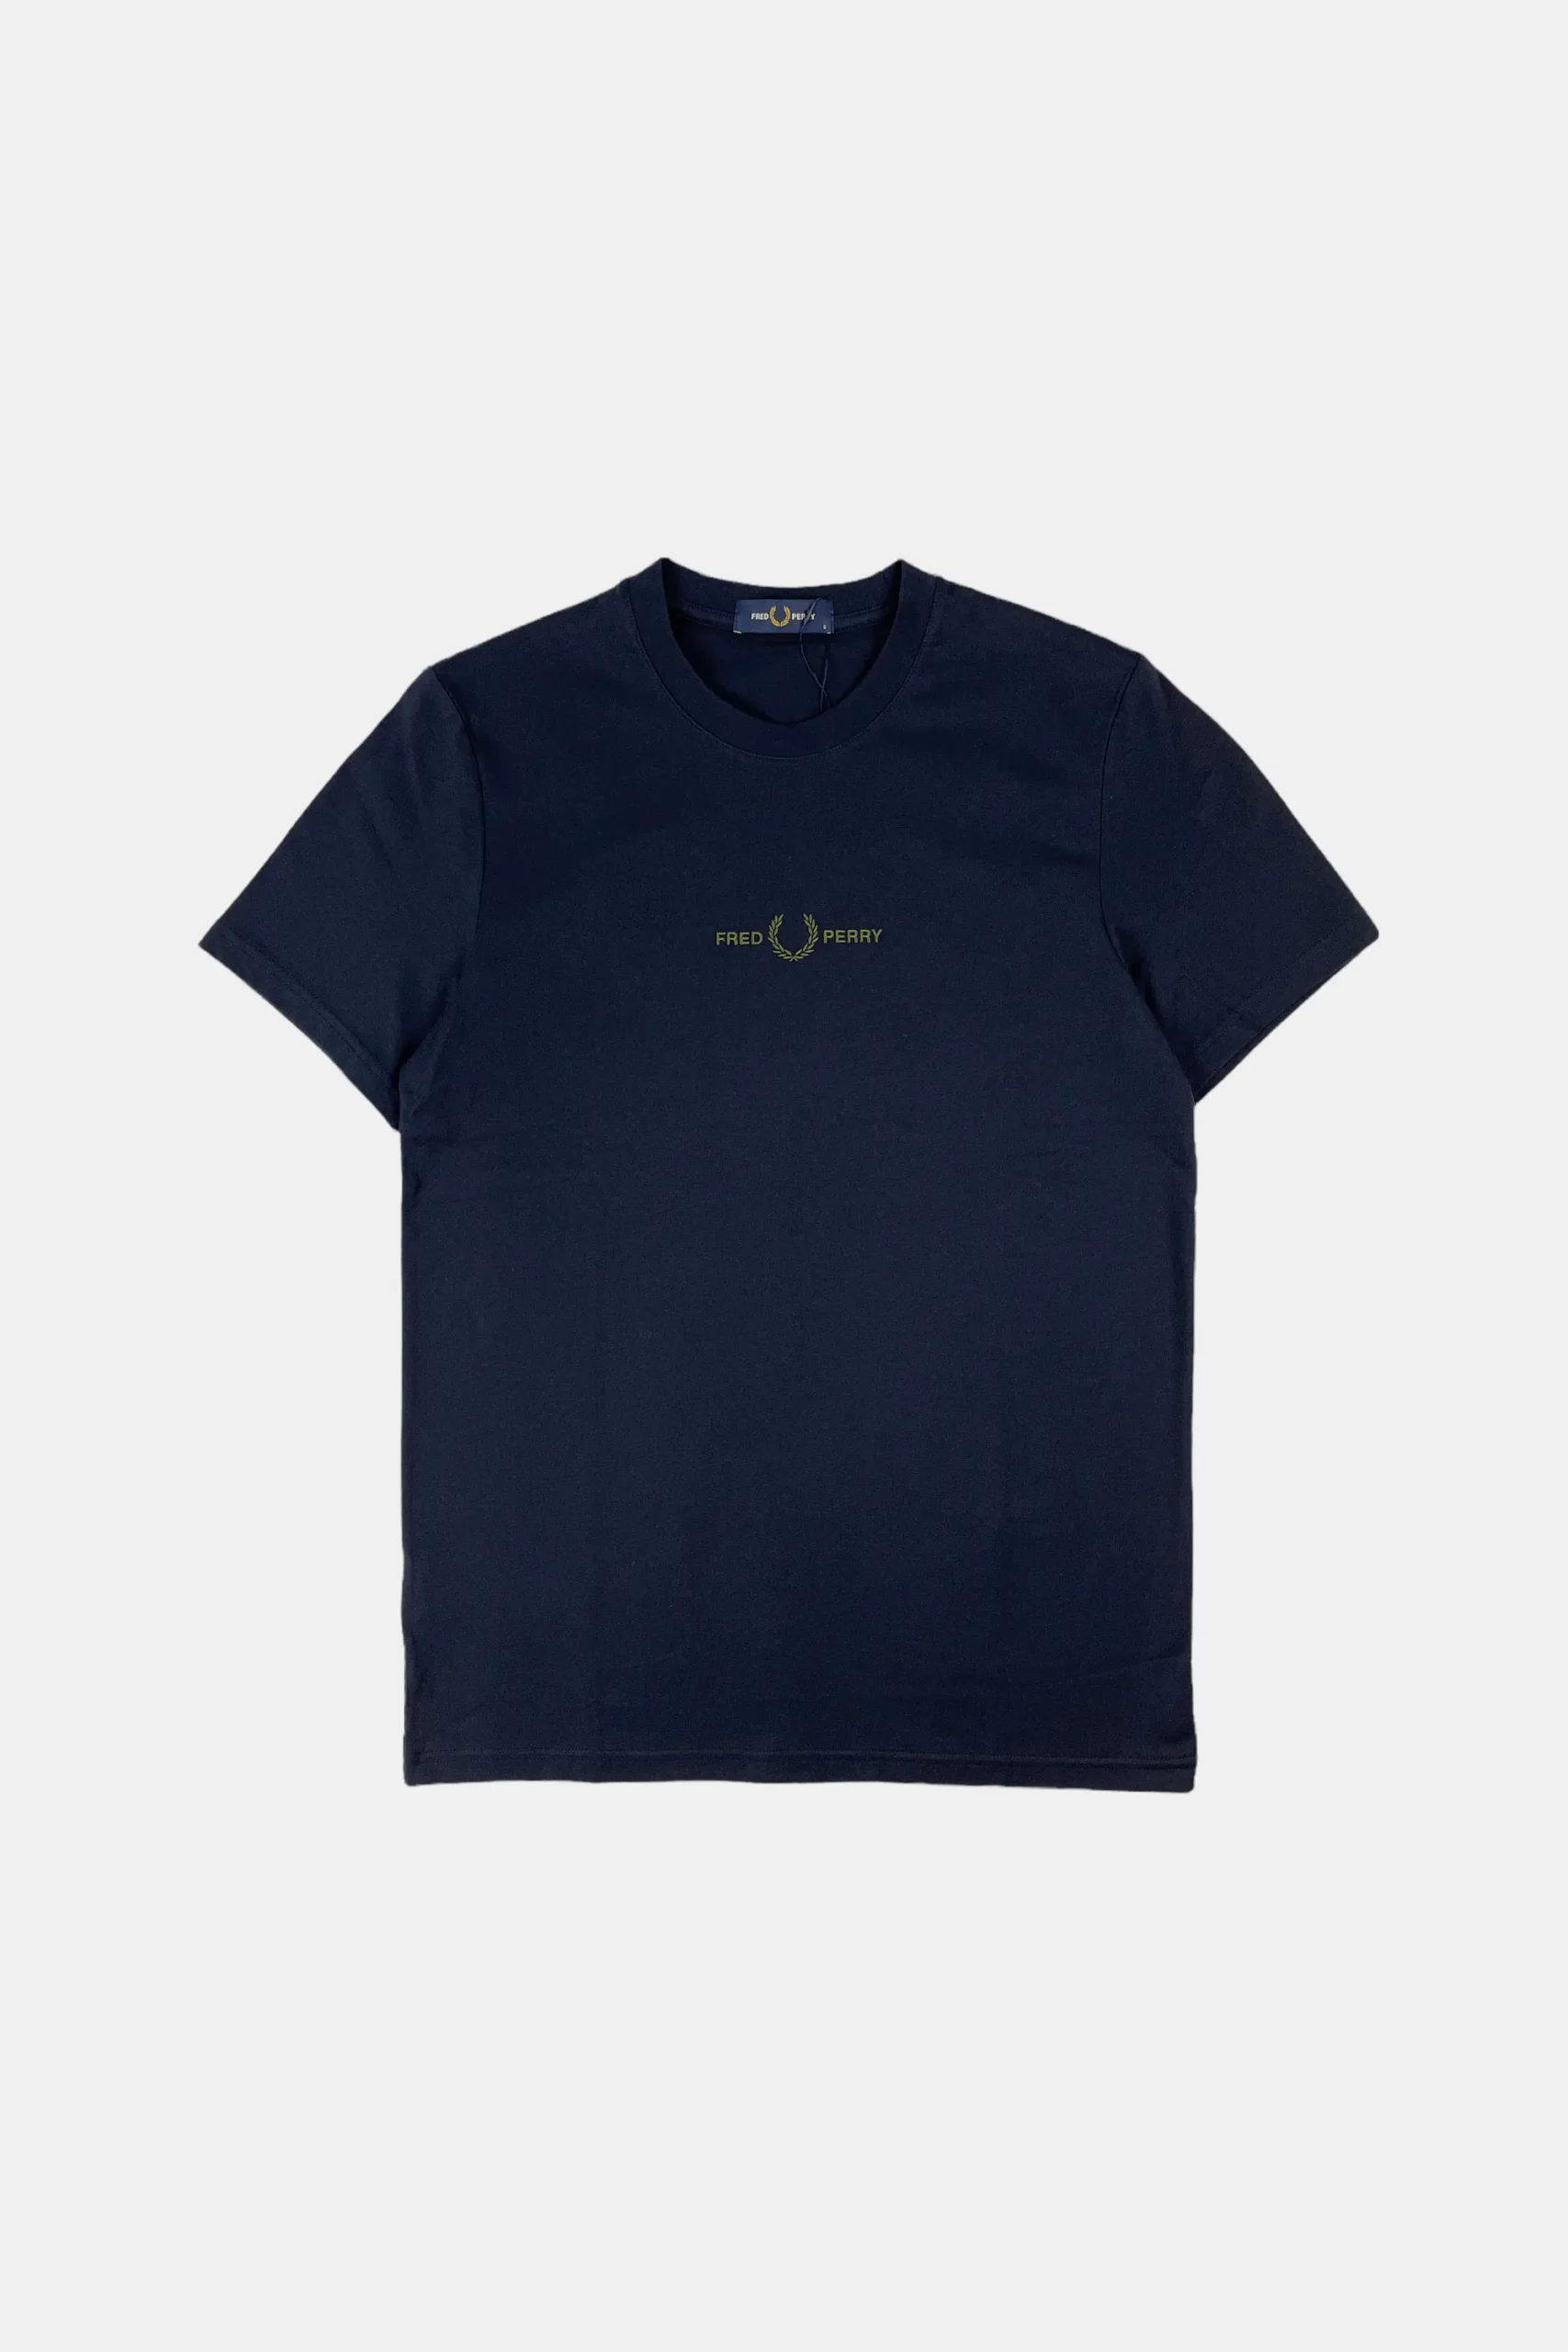 futbolka fred perry embroidered navy 1